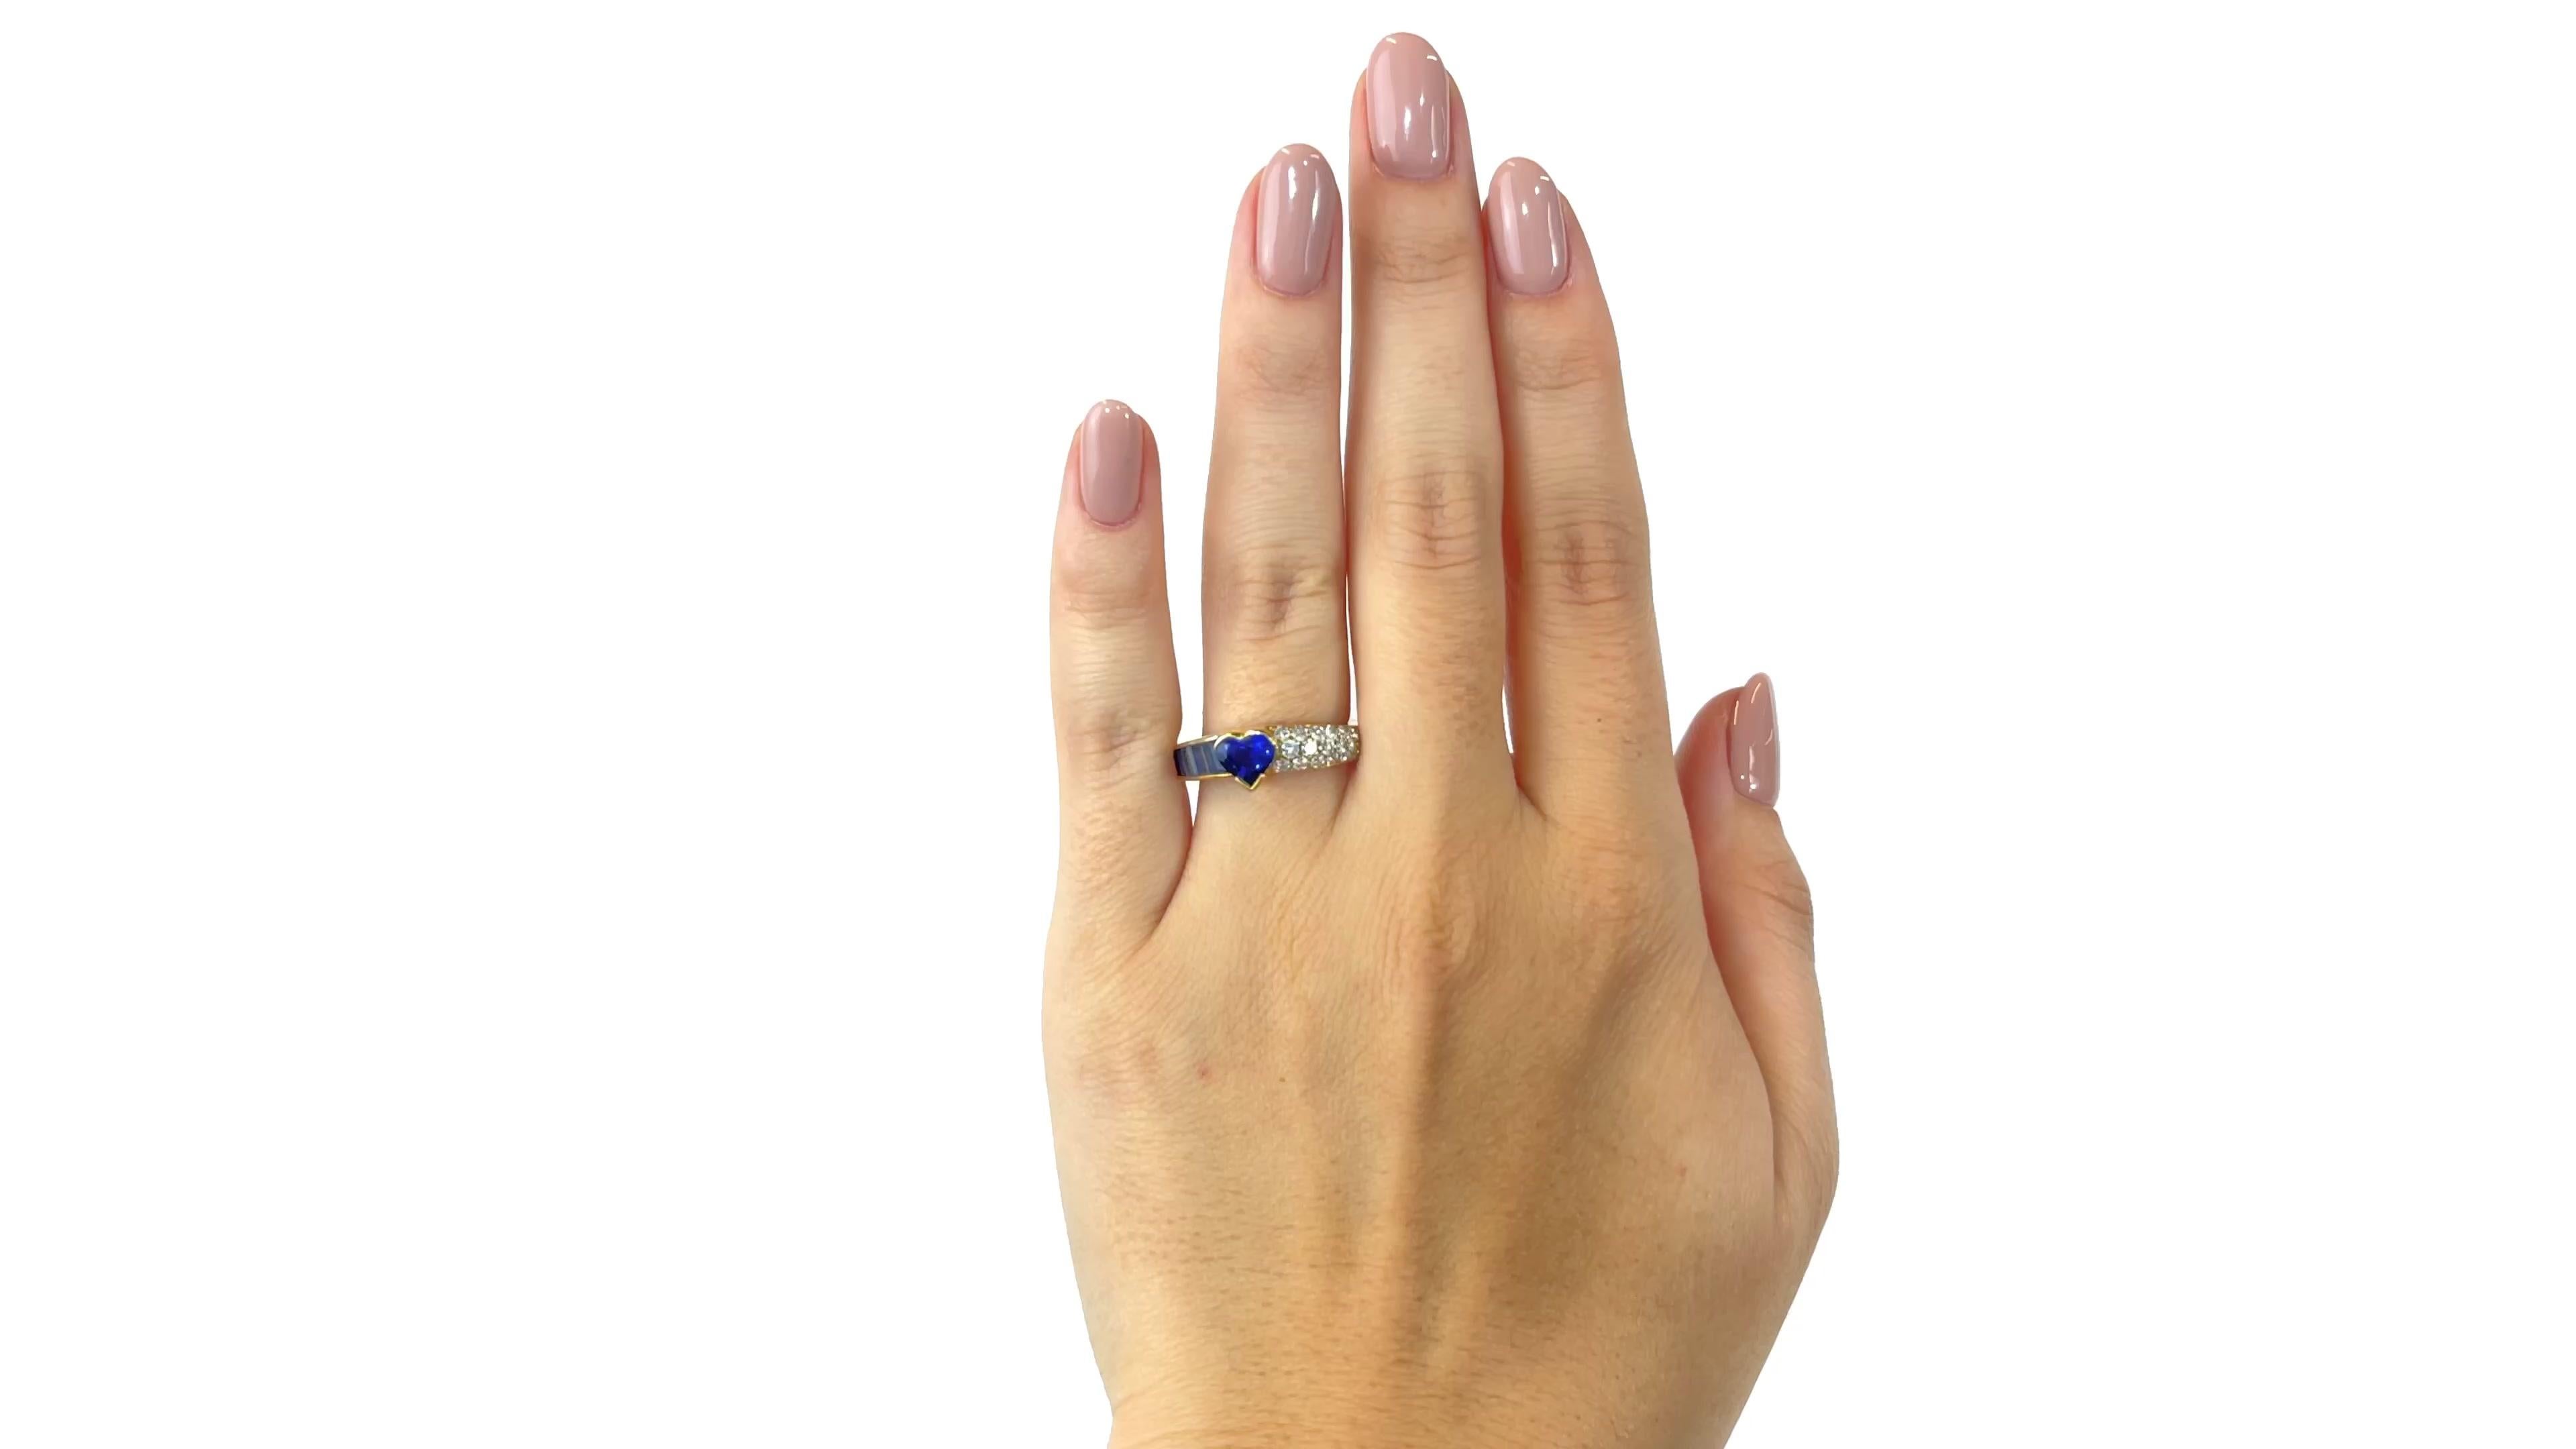 One Vintage Fred Paris Sapphire Diamond 18 Karat Gold Ring. Featuring one heart shaped sapphire weighing approximately 1.00 carat. Accented by six rectangular sapphires with a total weight of approximately 0.65 carats. Accented by 18 round brilliant